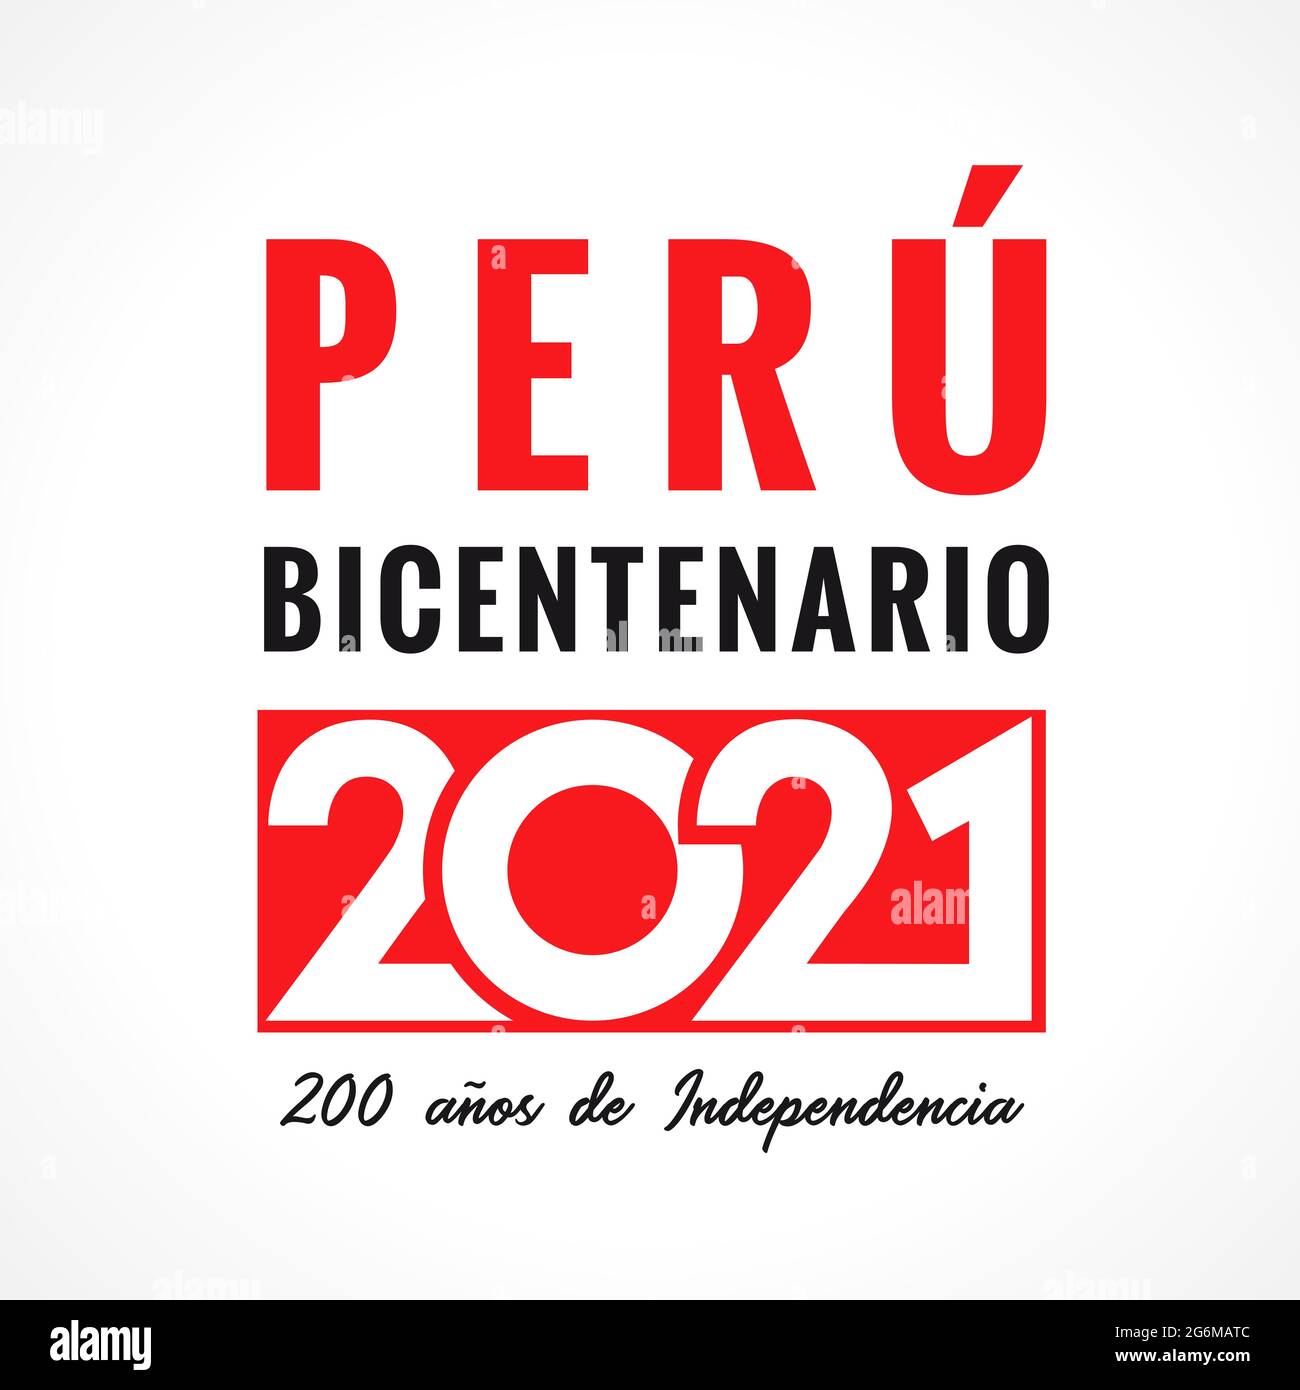 Ano del Bicentenario del Peru, 200 anos de Independencia, Peruvian lettering - Peru's Bicentennial Year, 200 years of Independence. Celebration banner Stock Vector